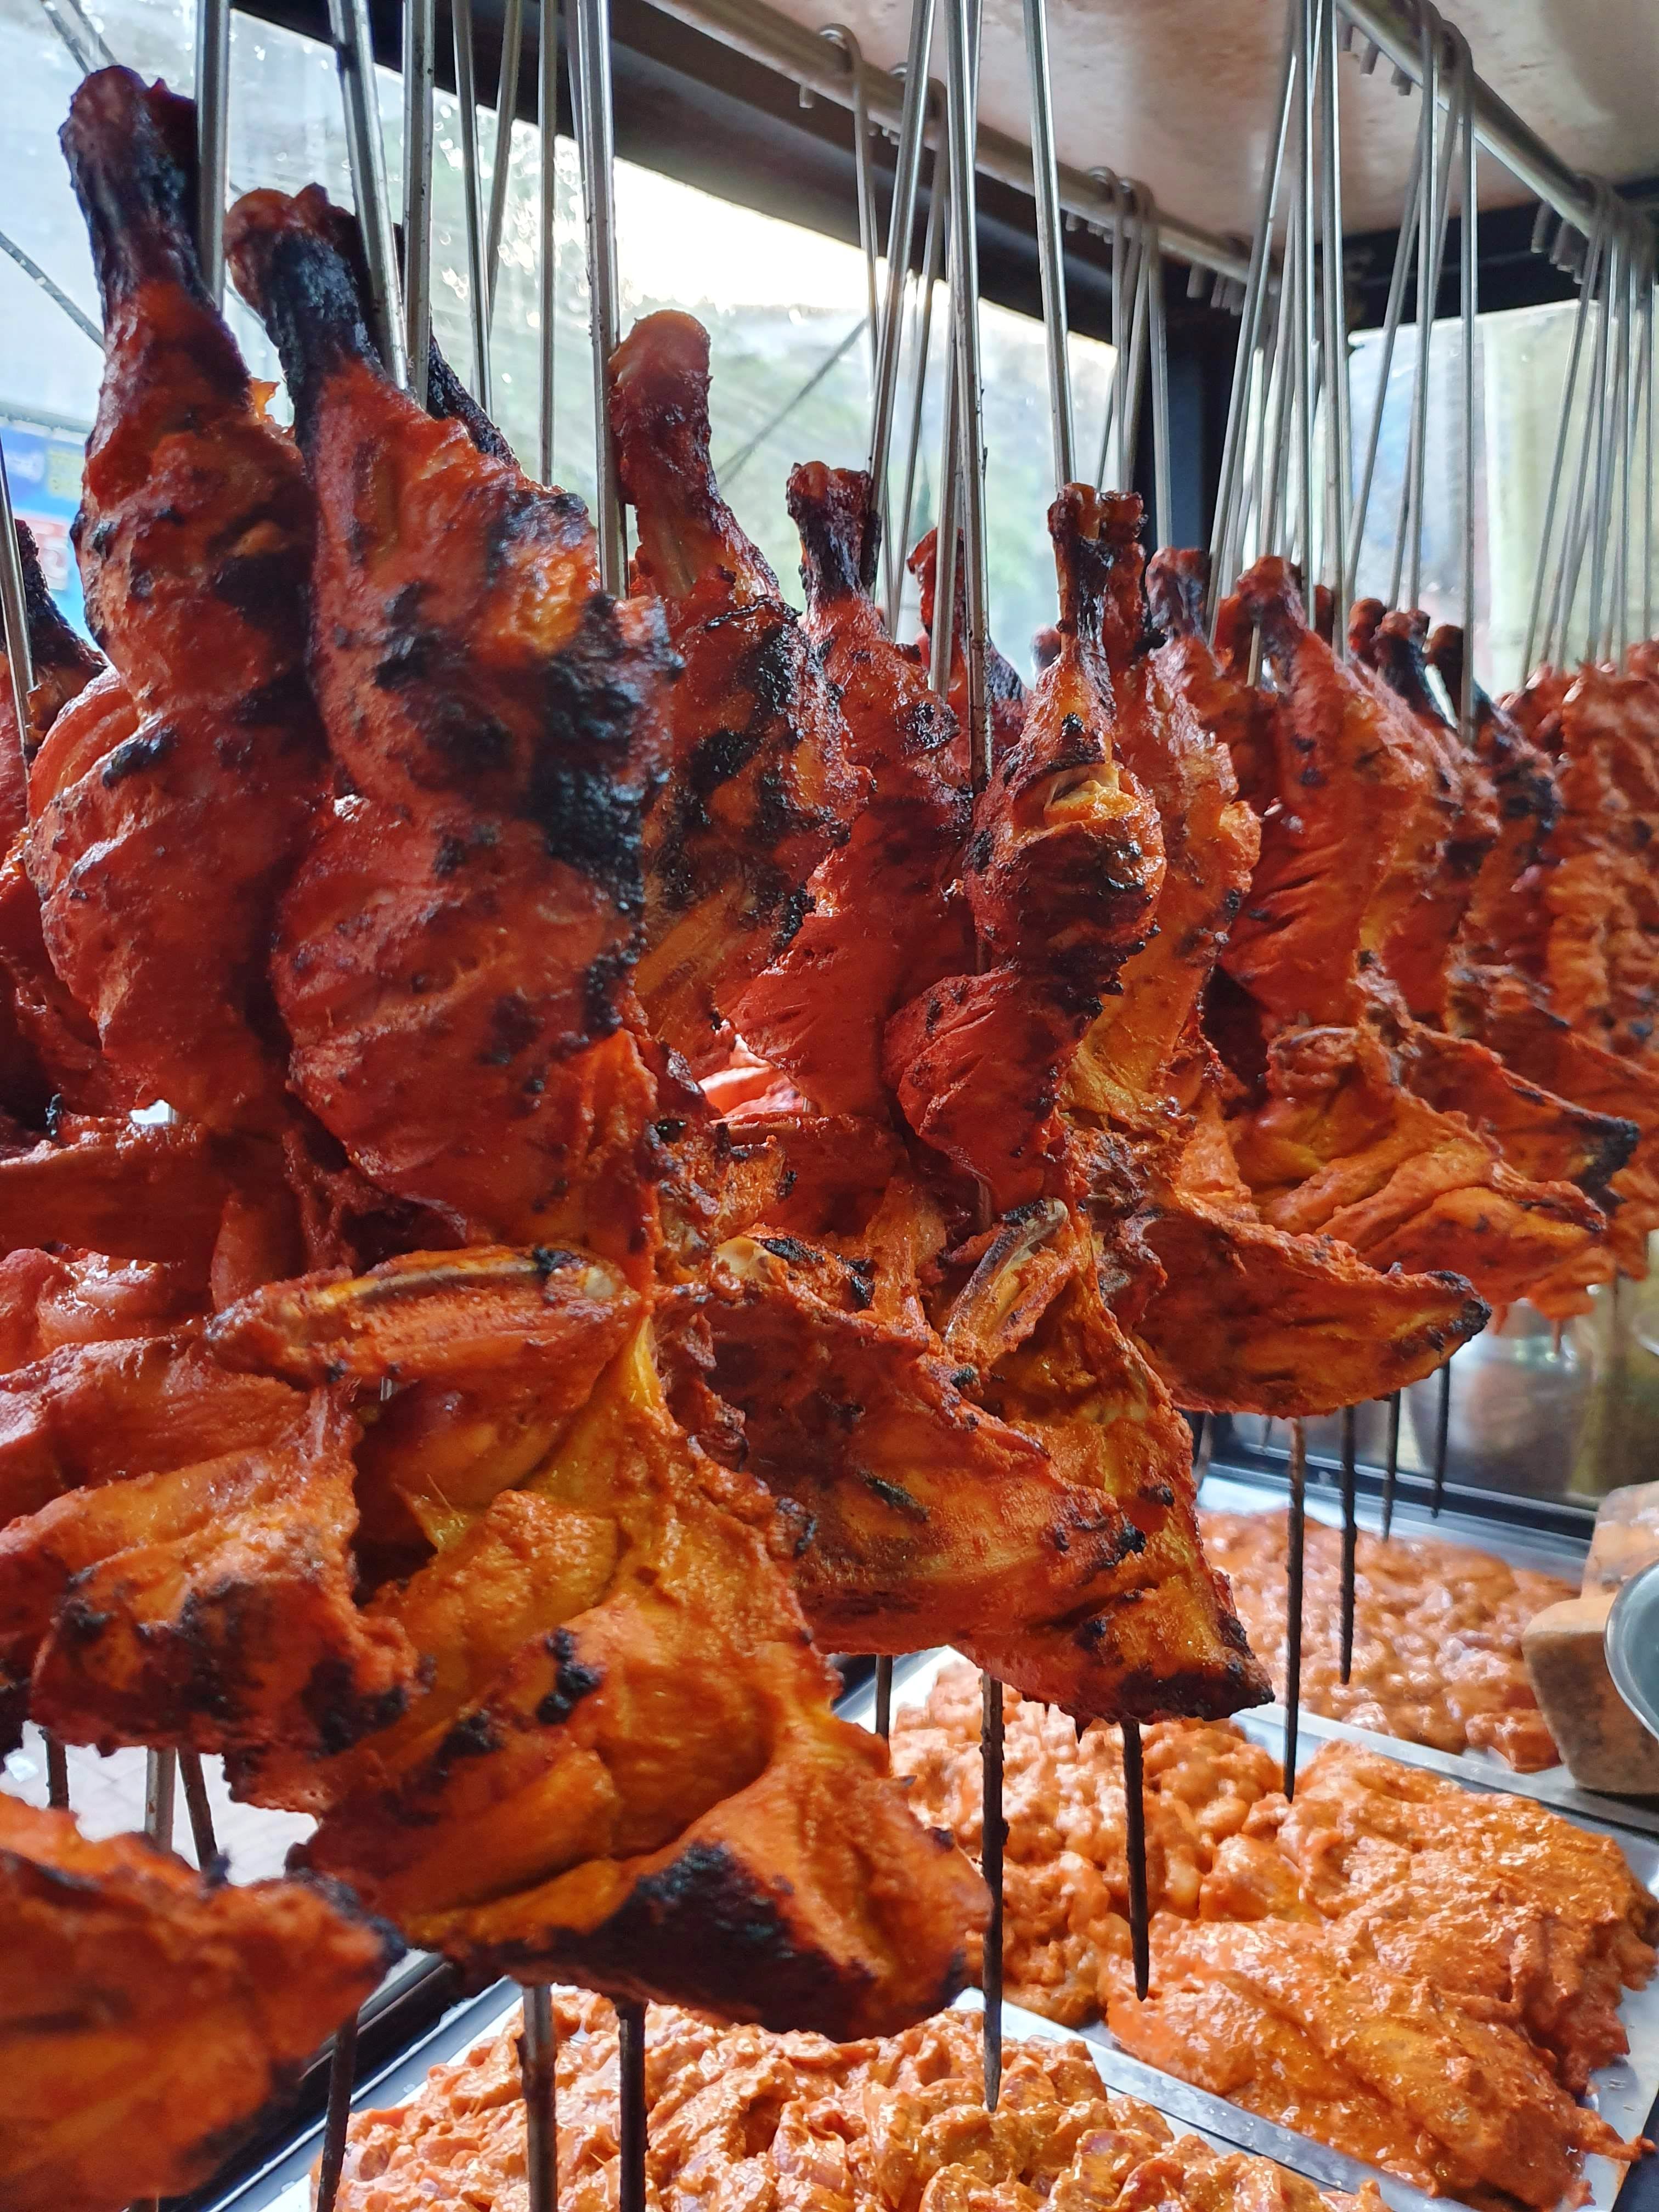 Meat,Food,Dish,Grilling,Cuisine,Roasting,Curing,Snack,Cooking,Goat meat